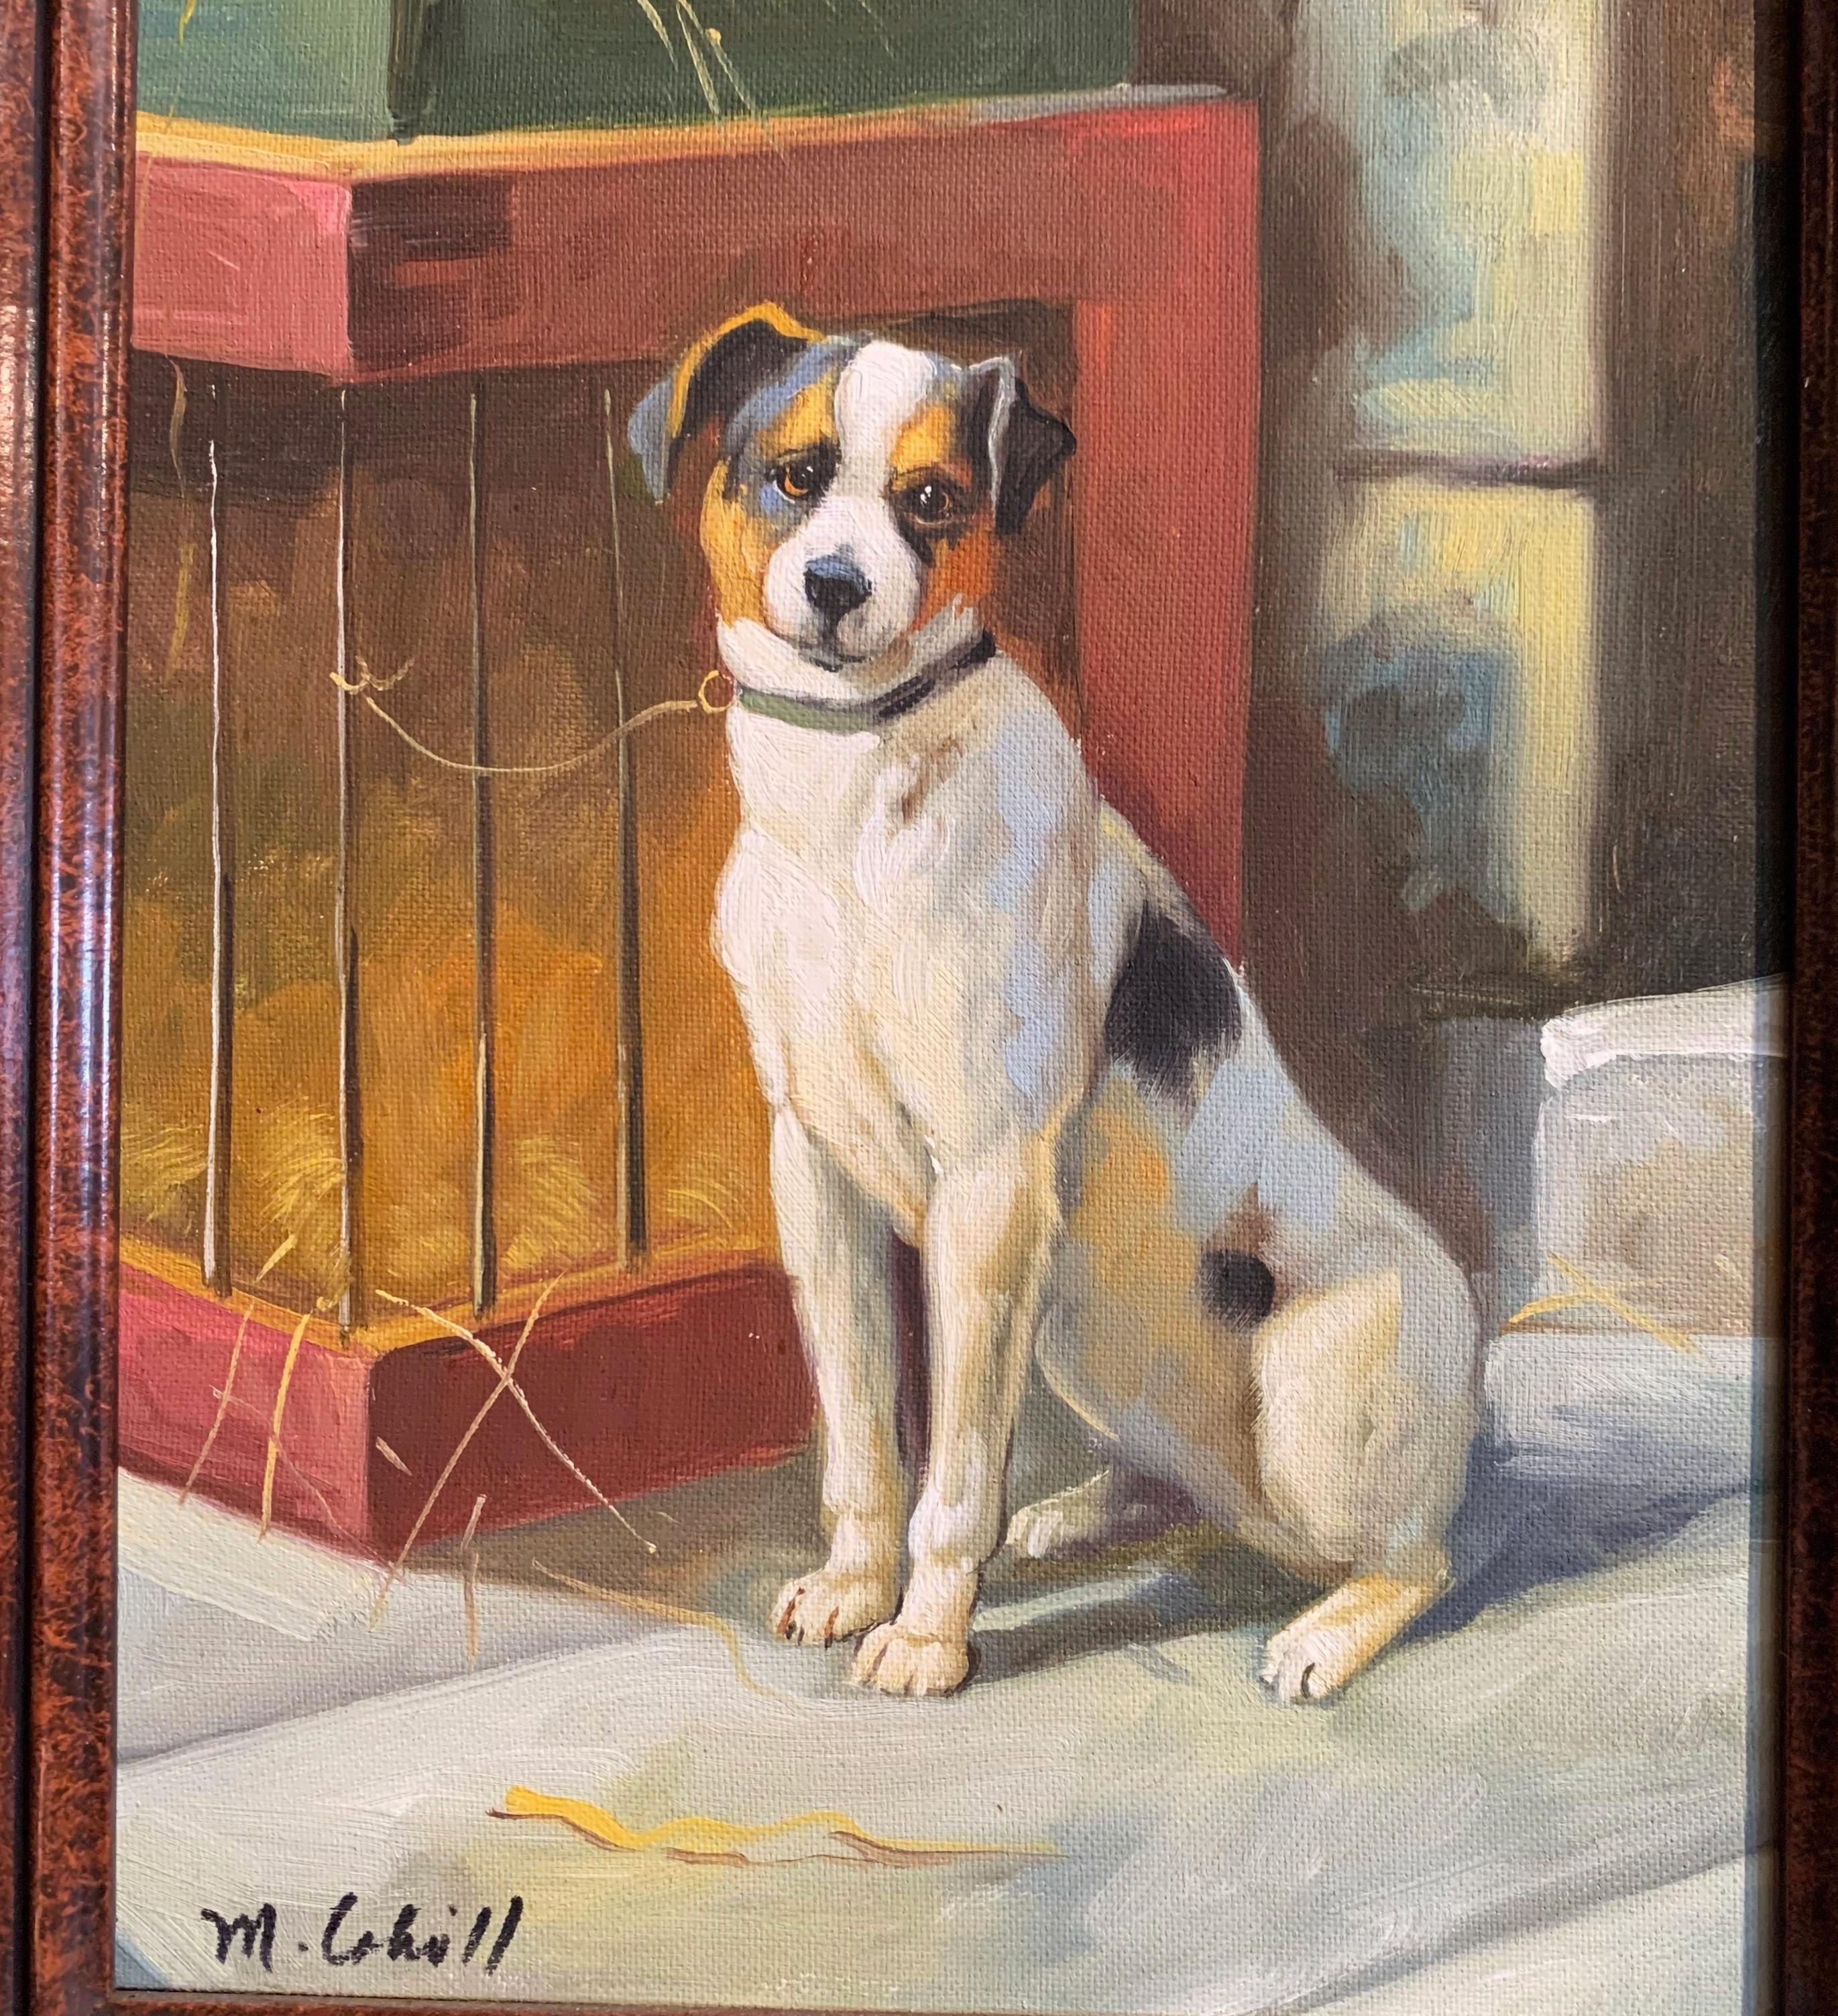 Set in the original carved frame, the hand painted canvas features a terrier tied to a fence. The artwork is signed on the bottom left corner by the artist, M. Cahill. The charming painting is in excellent condition with rich and bright colors. A